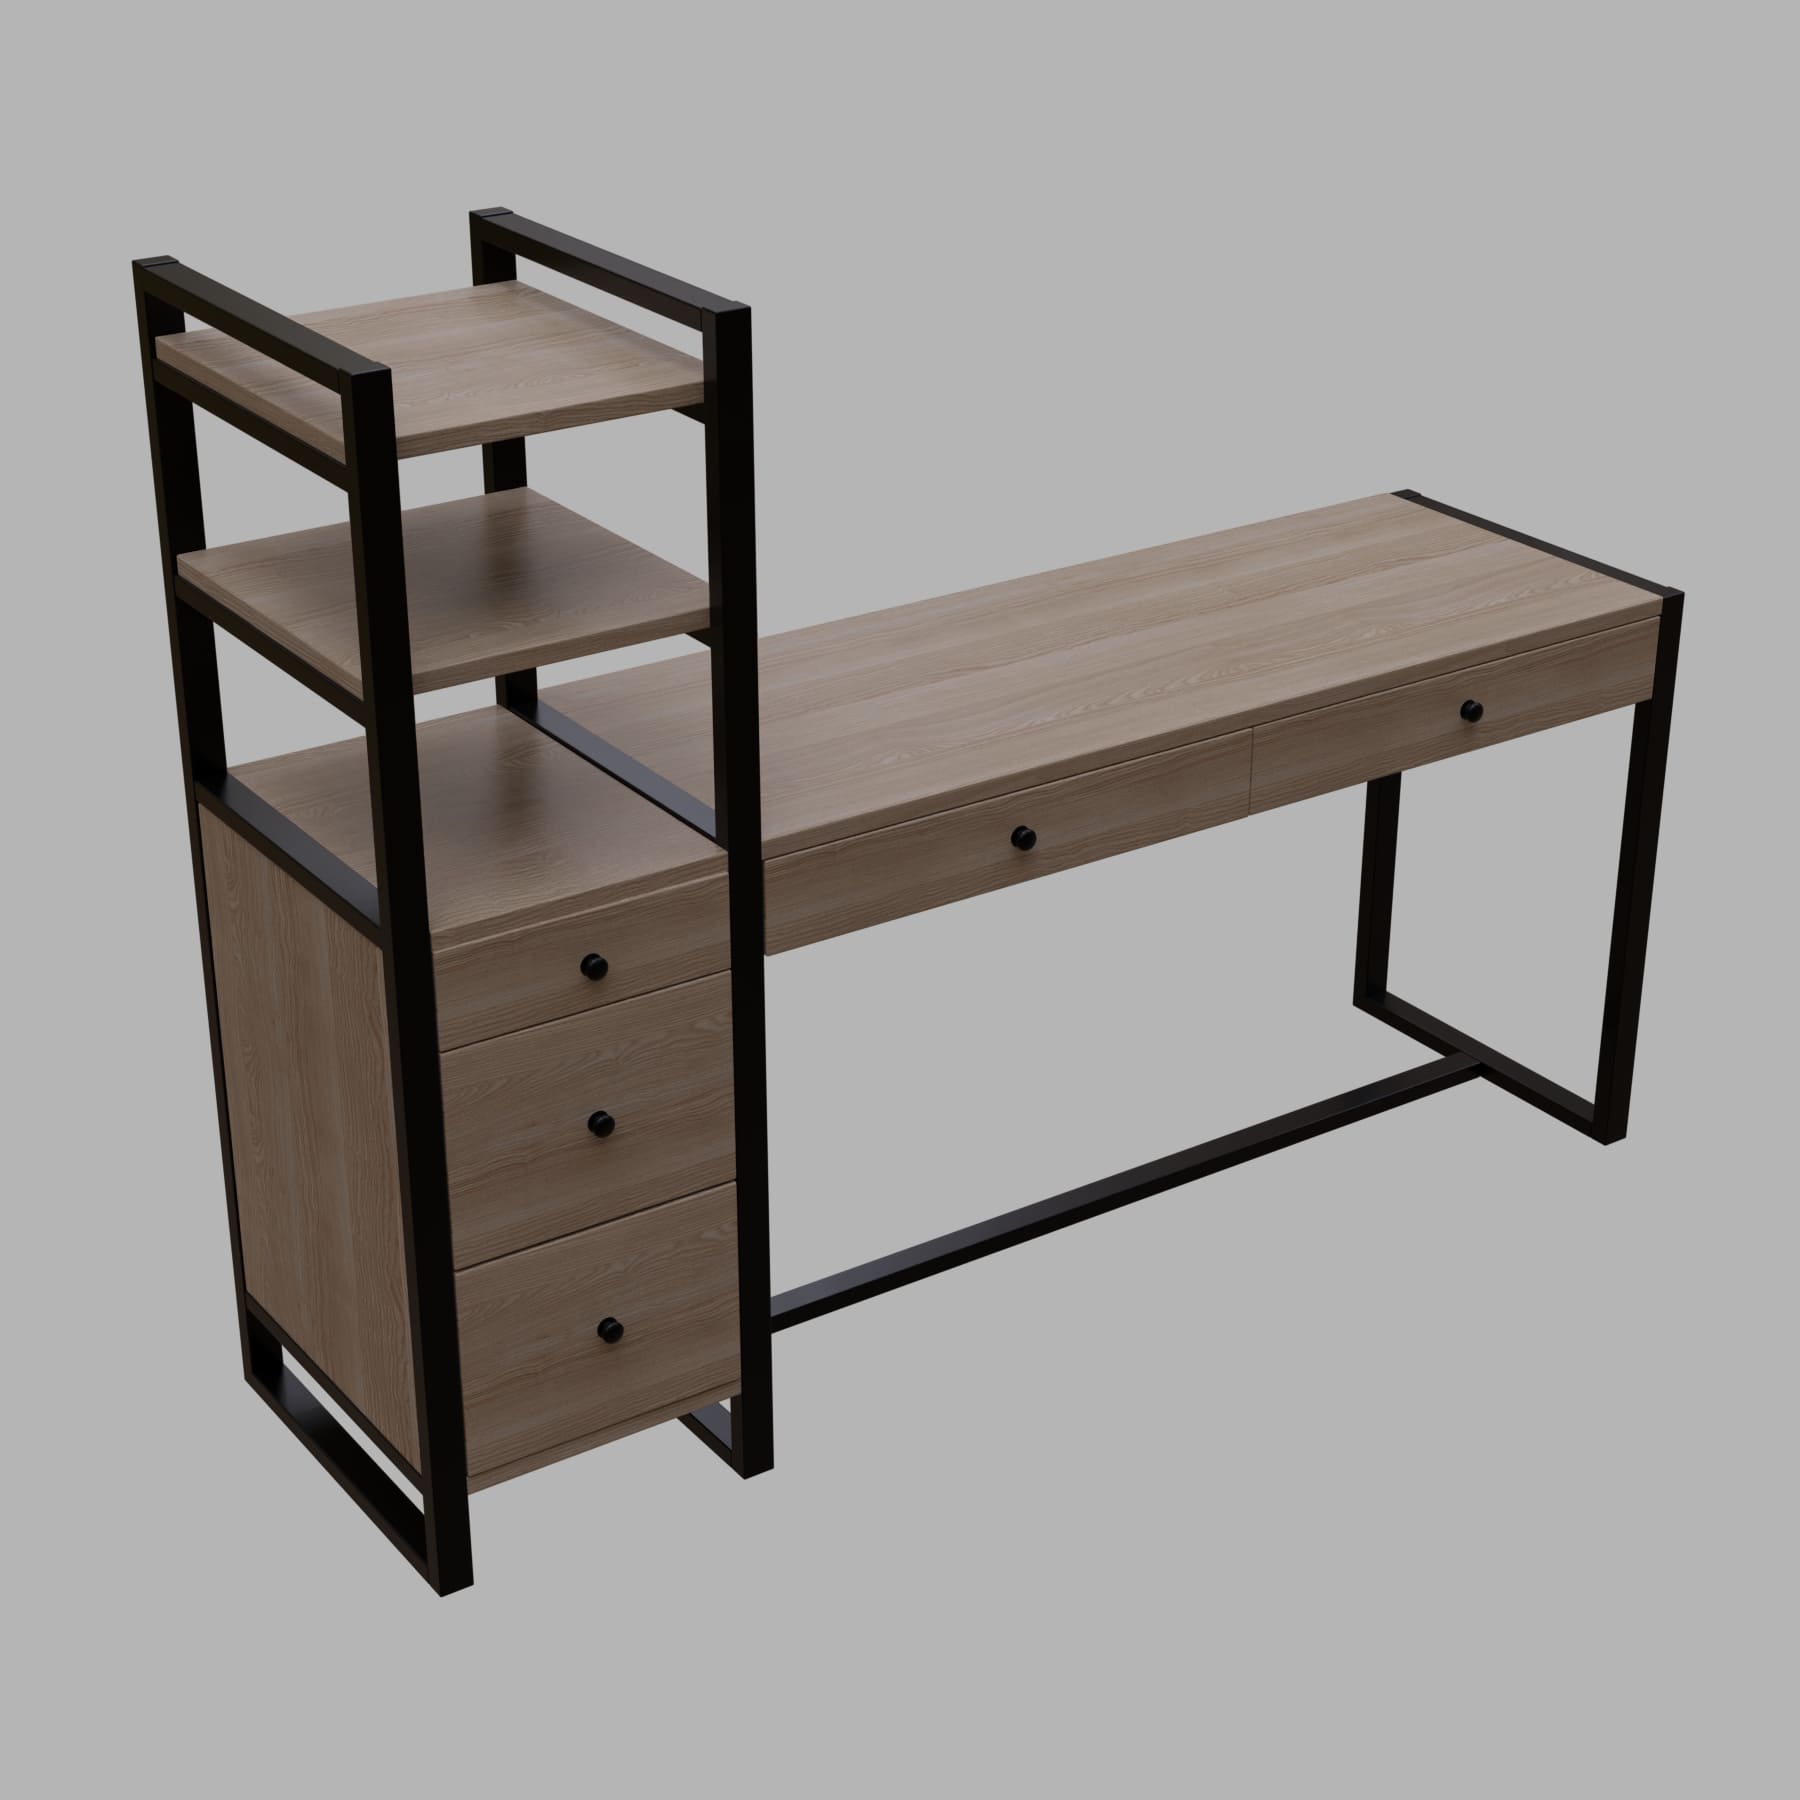 Rubi Study Table with drawers & storage shelves in wenge finish